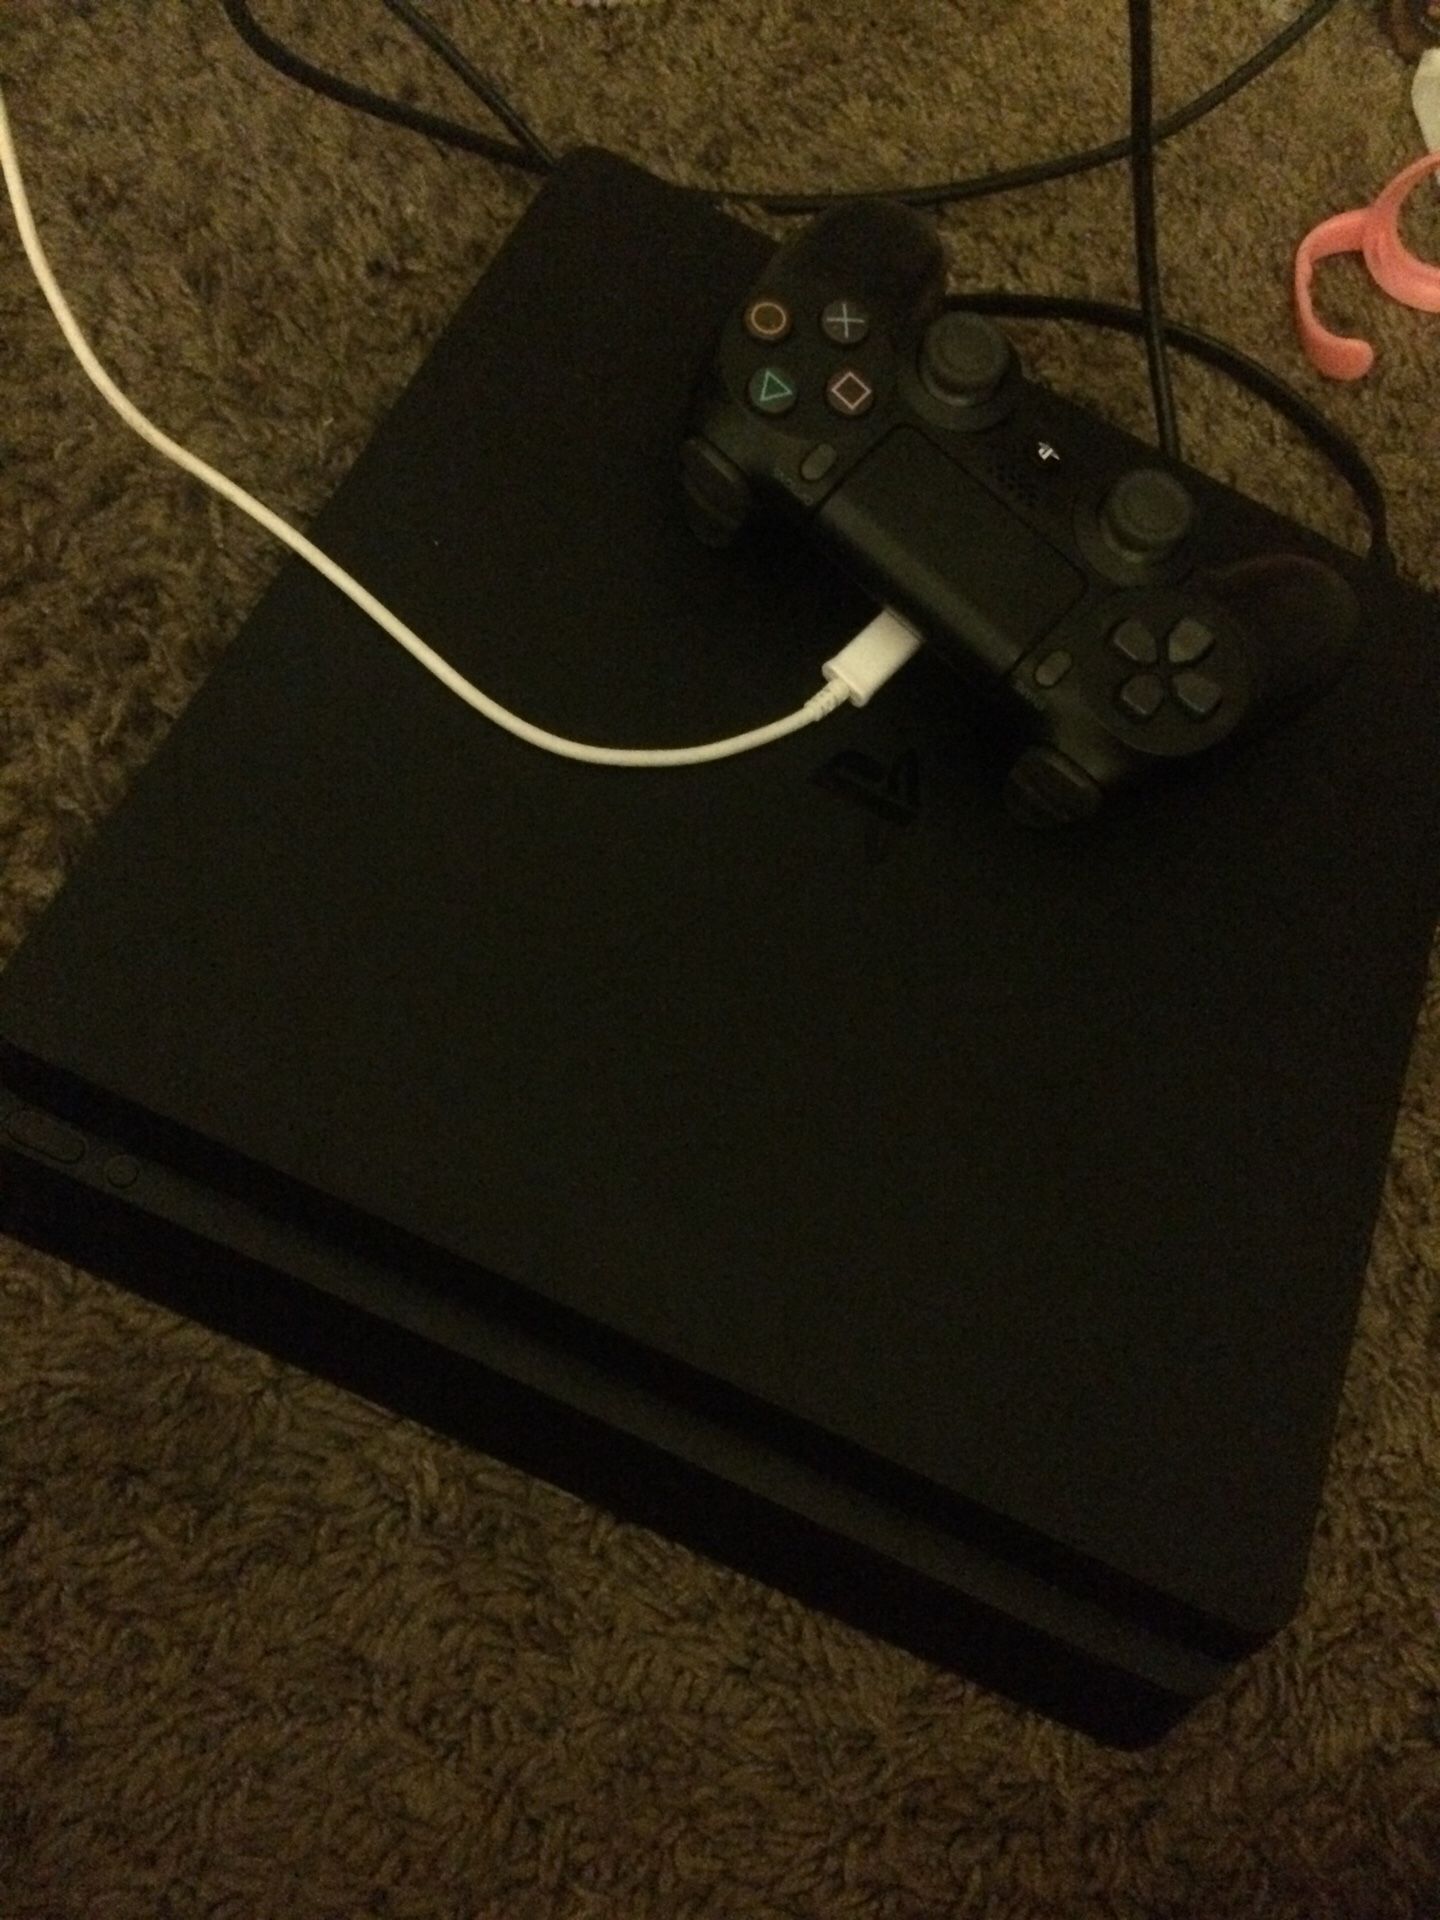 PS4 pro comes whit a controller and charger $180